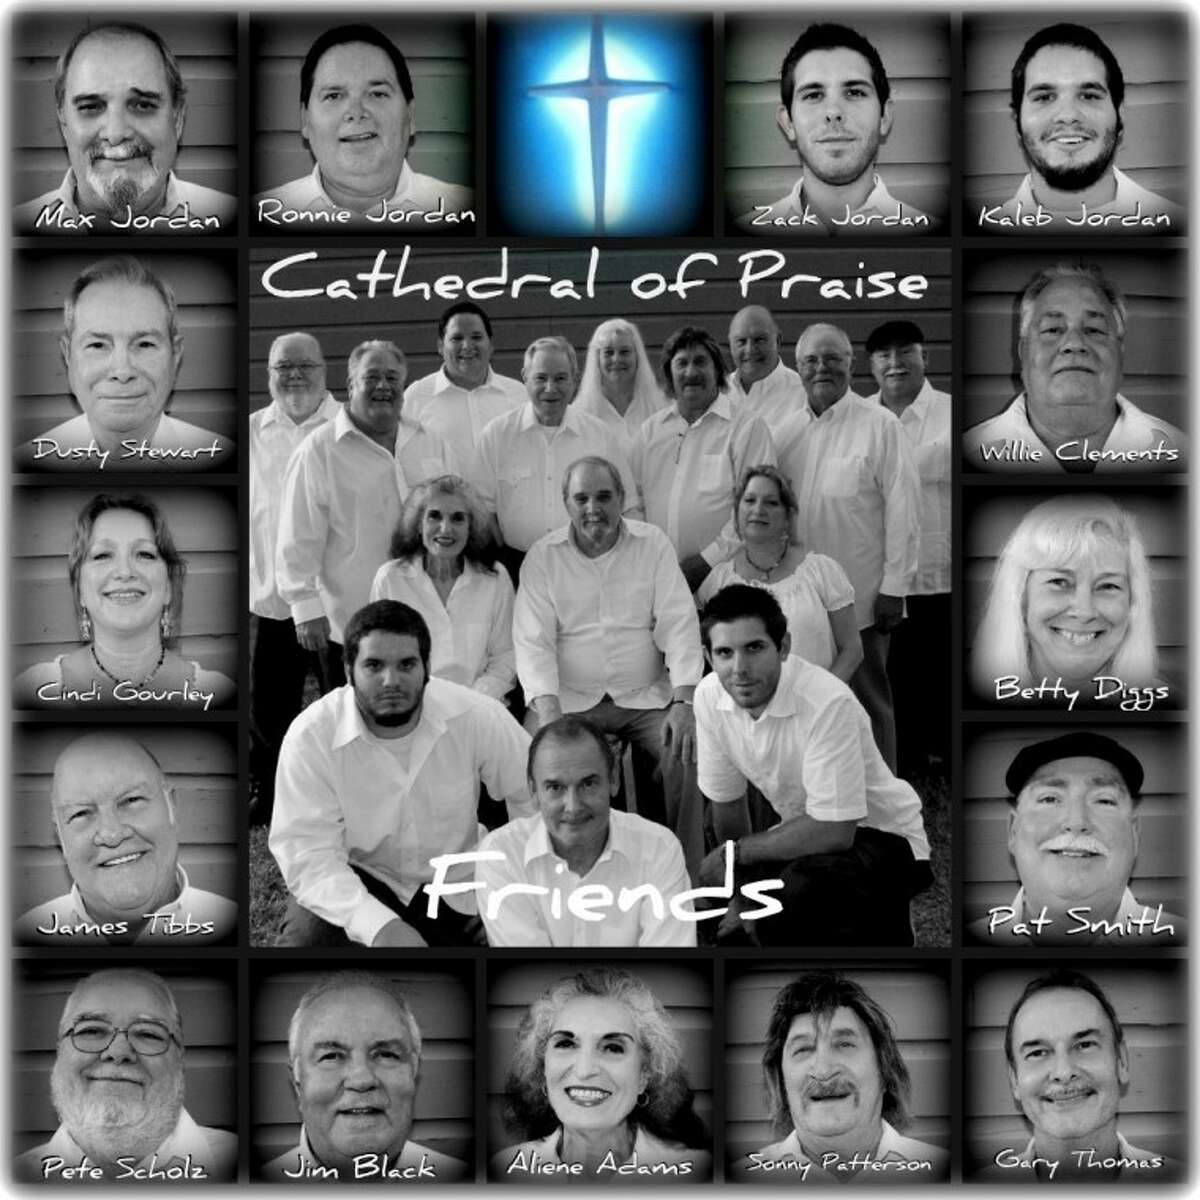 Pasadena Police Sgt. Ronnie Jordan has recorded a CD featuring members of his family, church congregation titled, Cathedral of Praise: Friends. The CD is a collection of original and traditional country-gospel songs. It is available online.